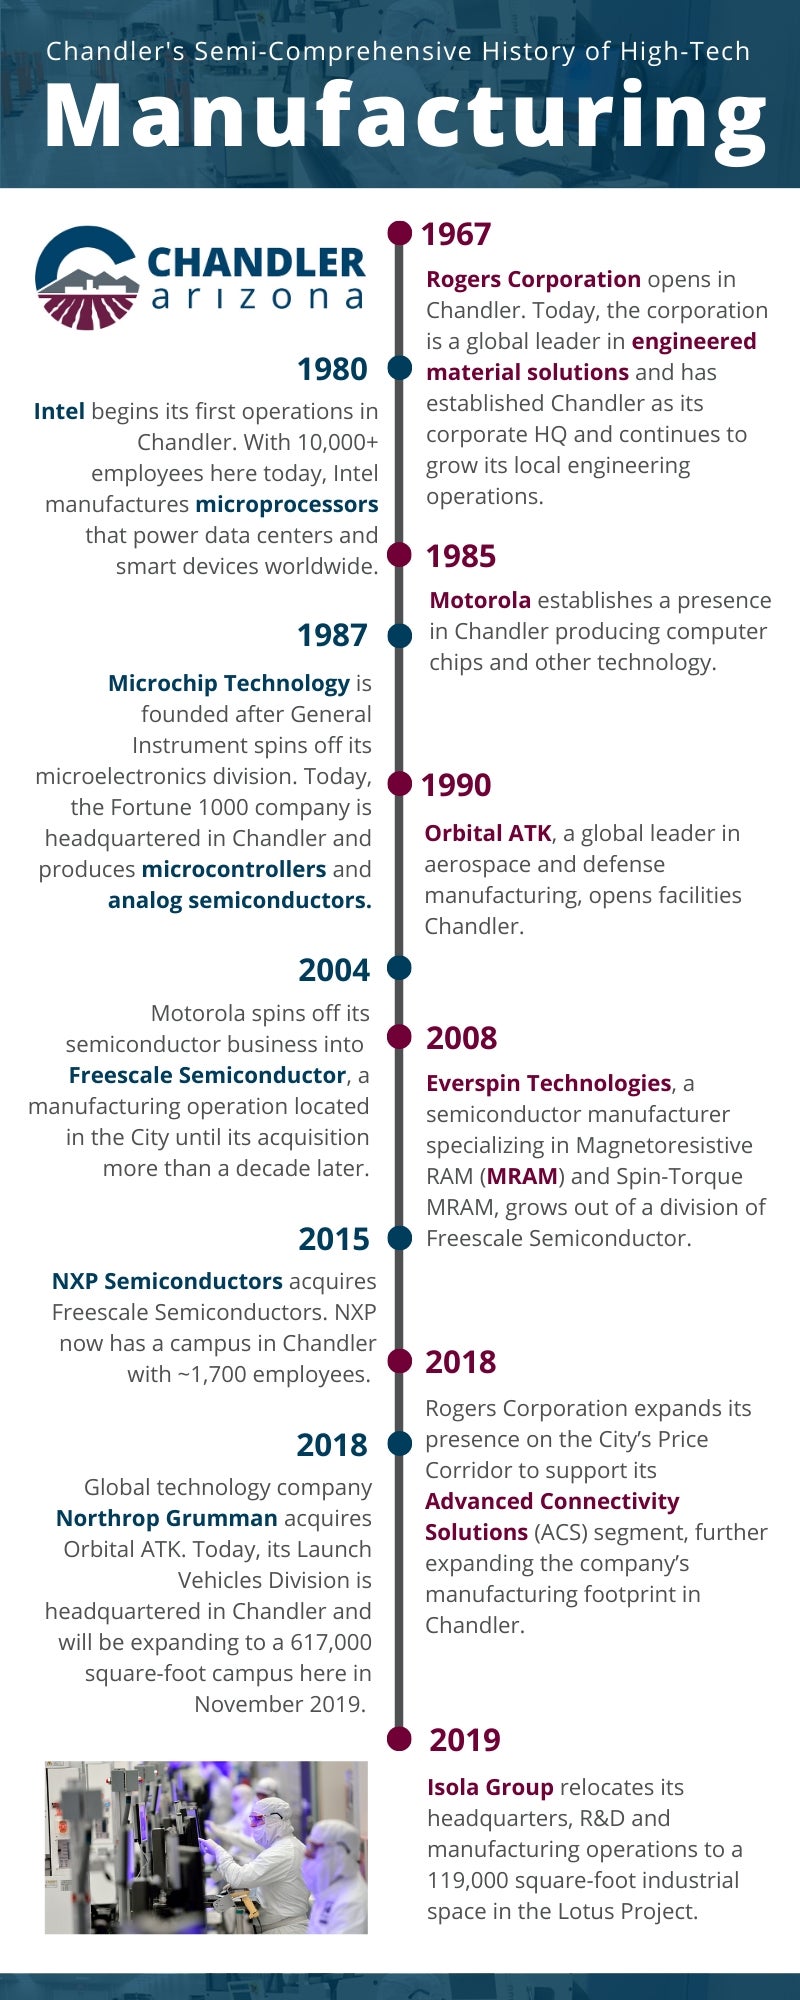 Timeline of Manufacturing in Chandler